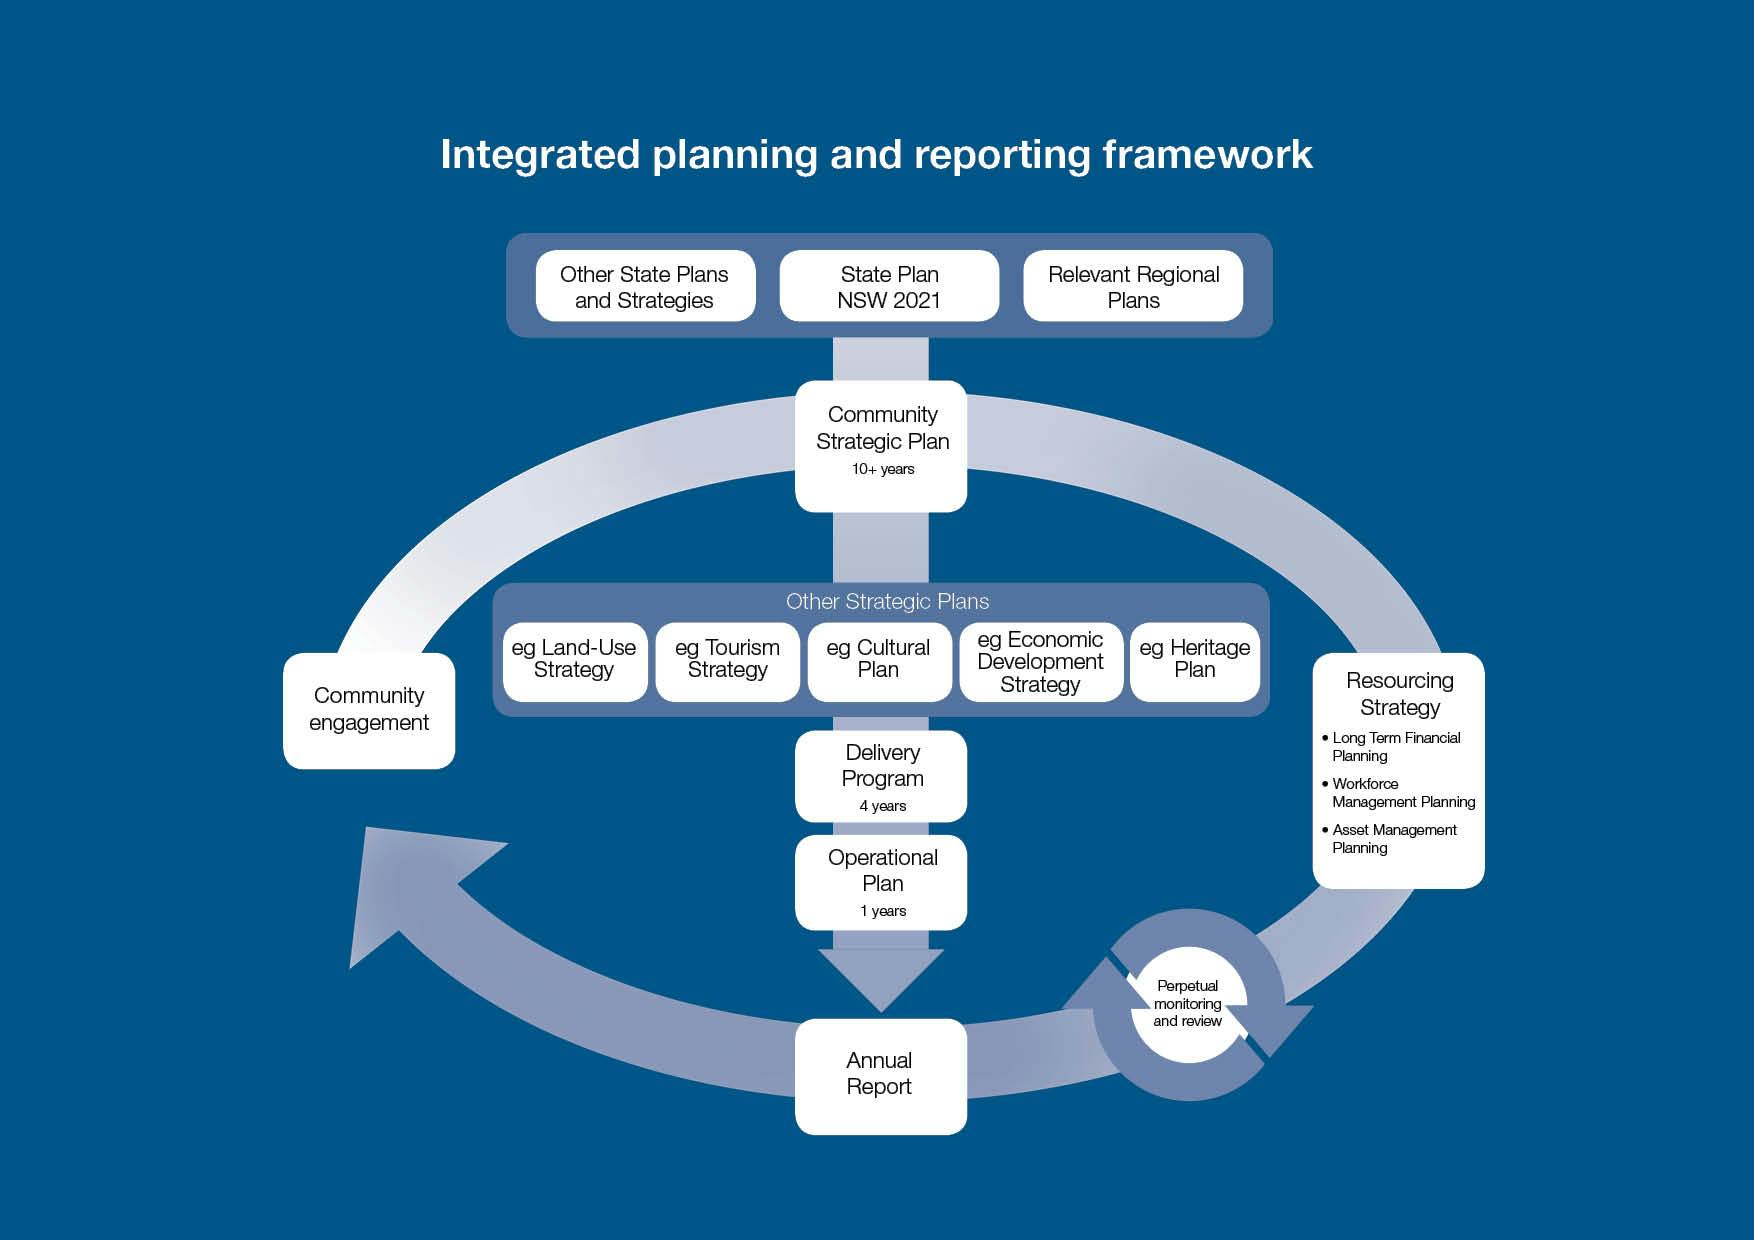 Council's Integrated Planning and Reporting Framework